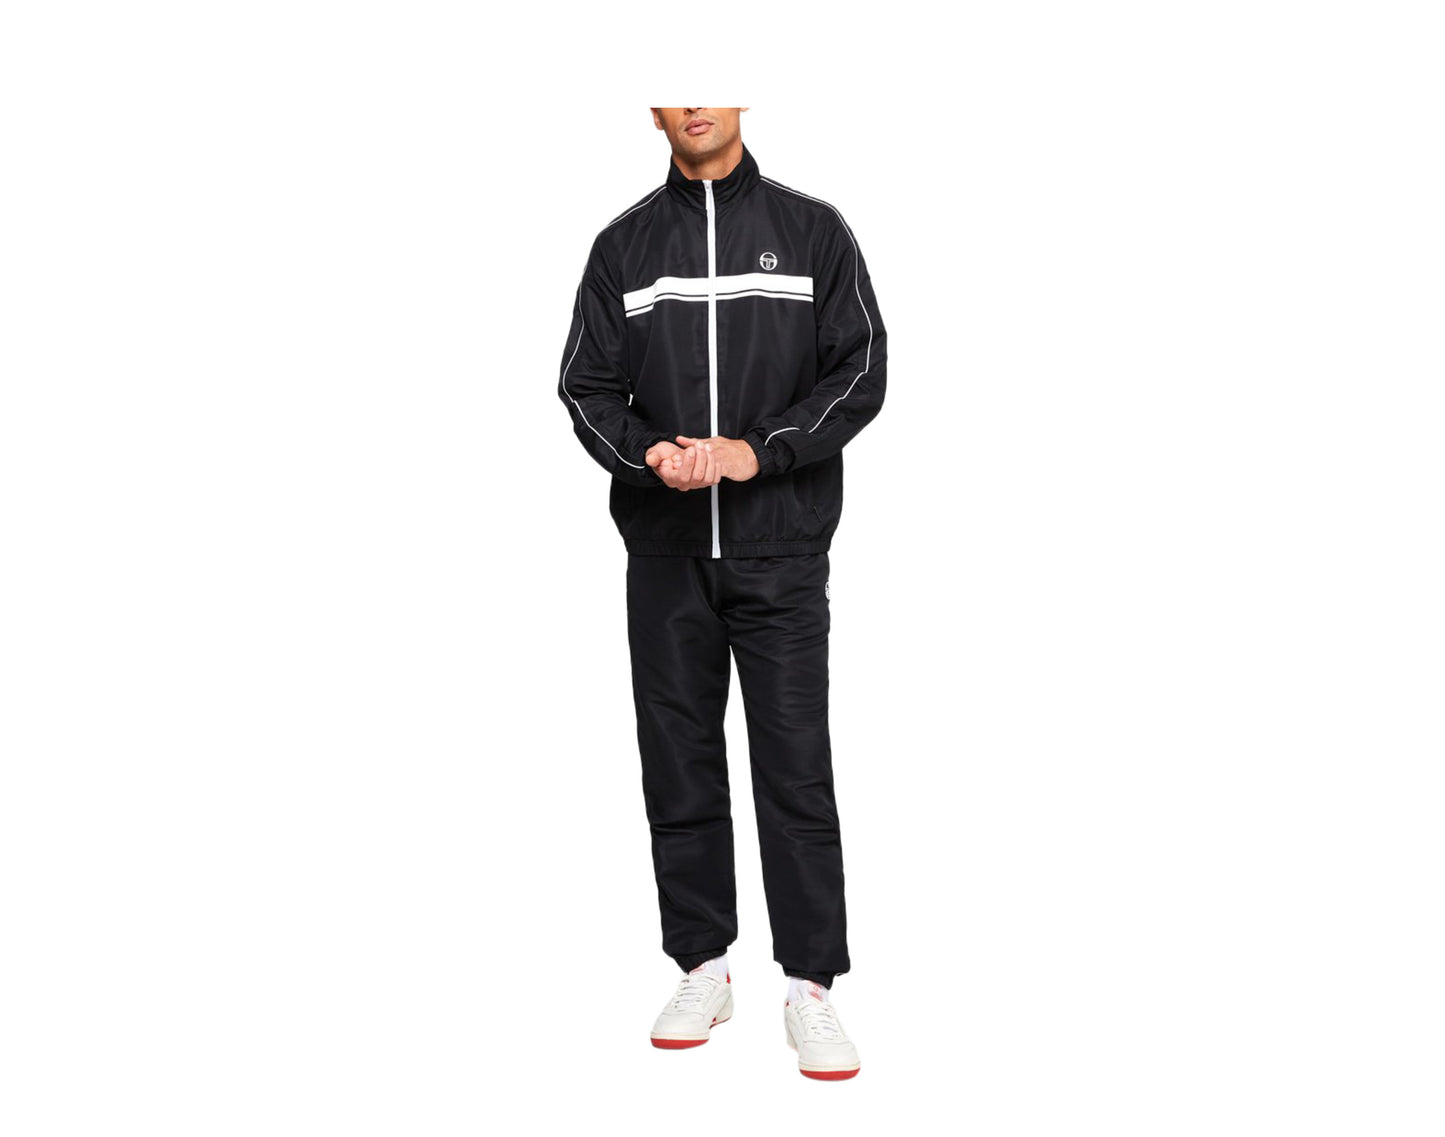 Sergio Tacchini Agave Men's Tracksuit - Top and Bottom